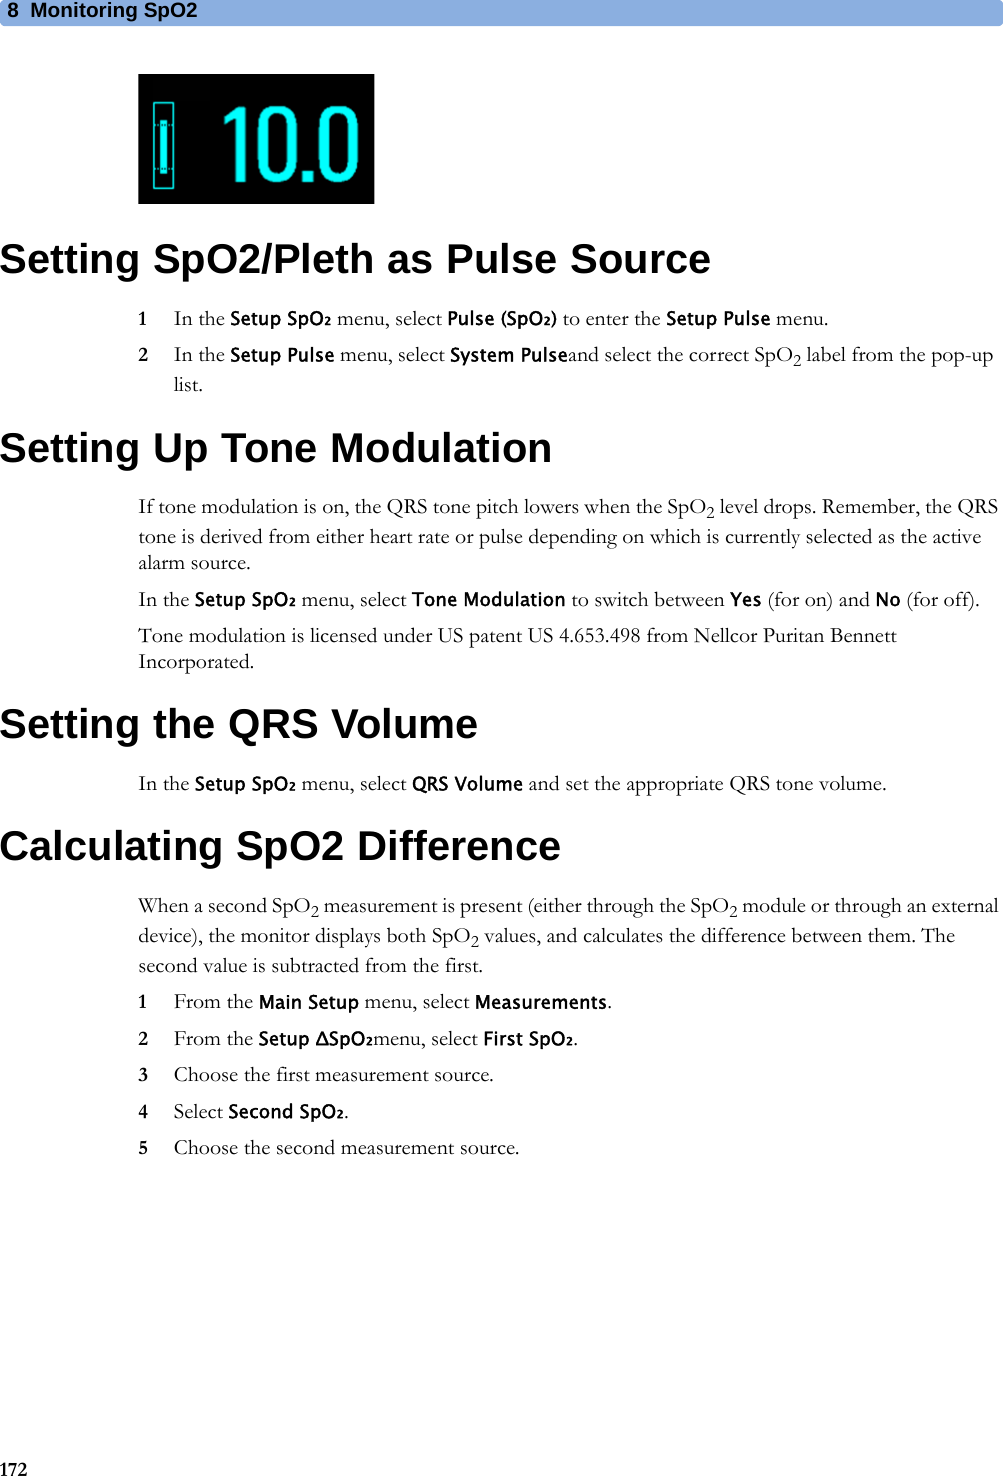 8 Monitoring SpO2172Setting SpO2/Pleth as Pulse Source1In the Setup SpO₂ menu, select Pulse (SpO₂) to enter the Setup Pulse menu.2In the Setup Pulse menu, select System Pulseand select the correct SpO2 label from the pop-up list.Setting Up Tone ModulationIf tone modulation is on, the QRS tone pitch lowers when the SpO2 level drops. Remember, the QRS tone is derived from either heart rate or pulse depending on which is currently selected as the active alarm source.In the Setup SpO₂ menu, select Tone Modulation to switch between Yes (for on) and No (for off).Tone modulation is licensed under US patent US 4.653.498 from Nellcor Puritan Bennett Incorporated.Setting the QRS VolumeIn the Setup SpO₂ menu, select QRS Volume and set the appropriate QRS tone volume.Calculating SpO2 DifferenceWhen a second SpO2 measurement is present (either through the SpO2 module or through an external device), the monitor displays both SpO2 values, and calculates the difference between them. The second value is subtracted from the first.1From the Main Setup menu, select Measurements.2From the Setup ΔSpO₂menu, select First SpO₂.3Choose the first measurement source.4Select Second SpO₂.5Choose the second measurement source.